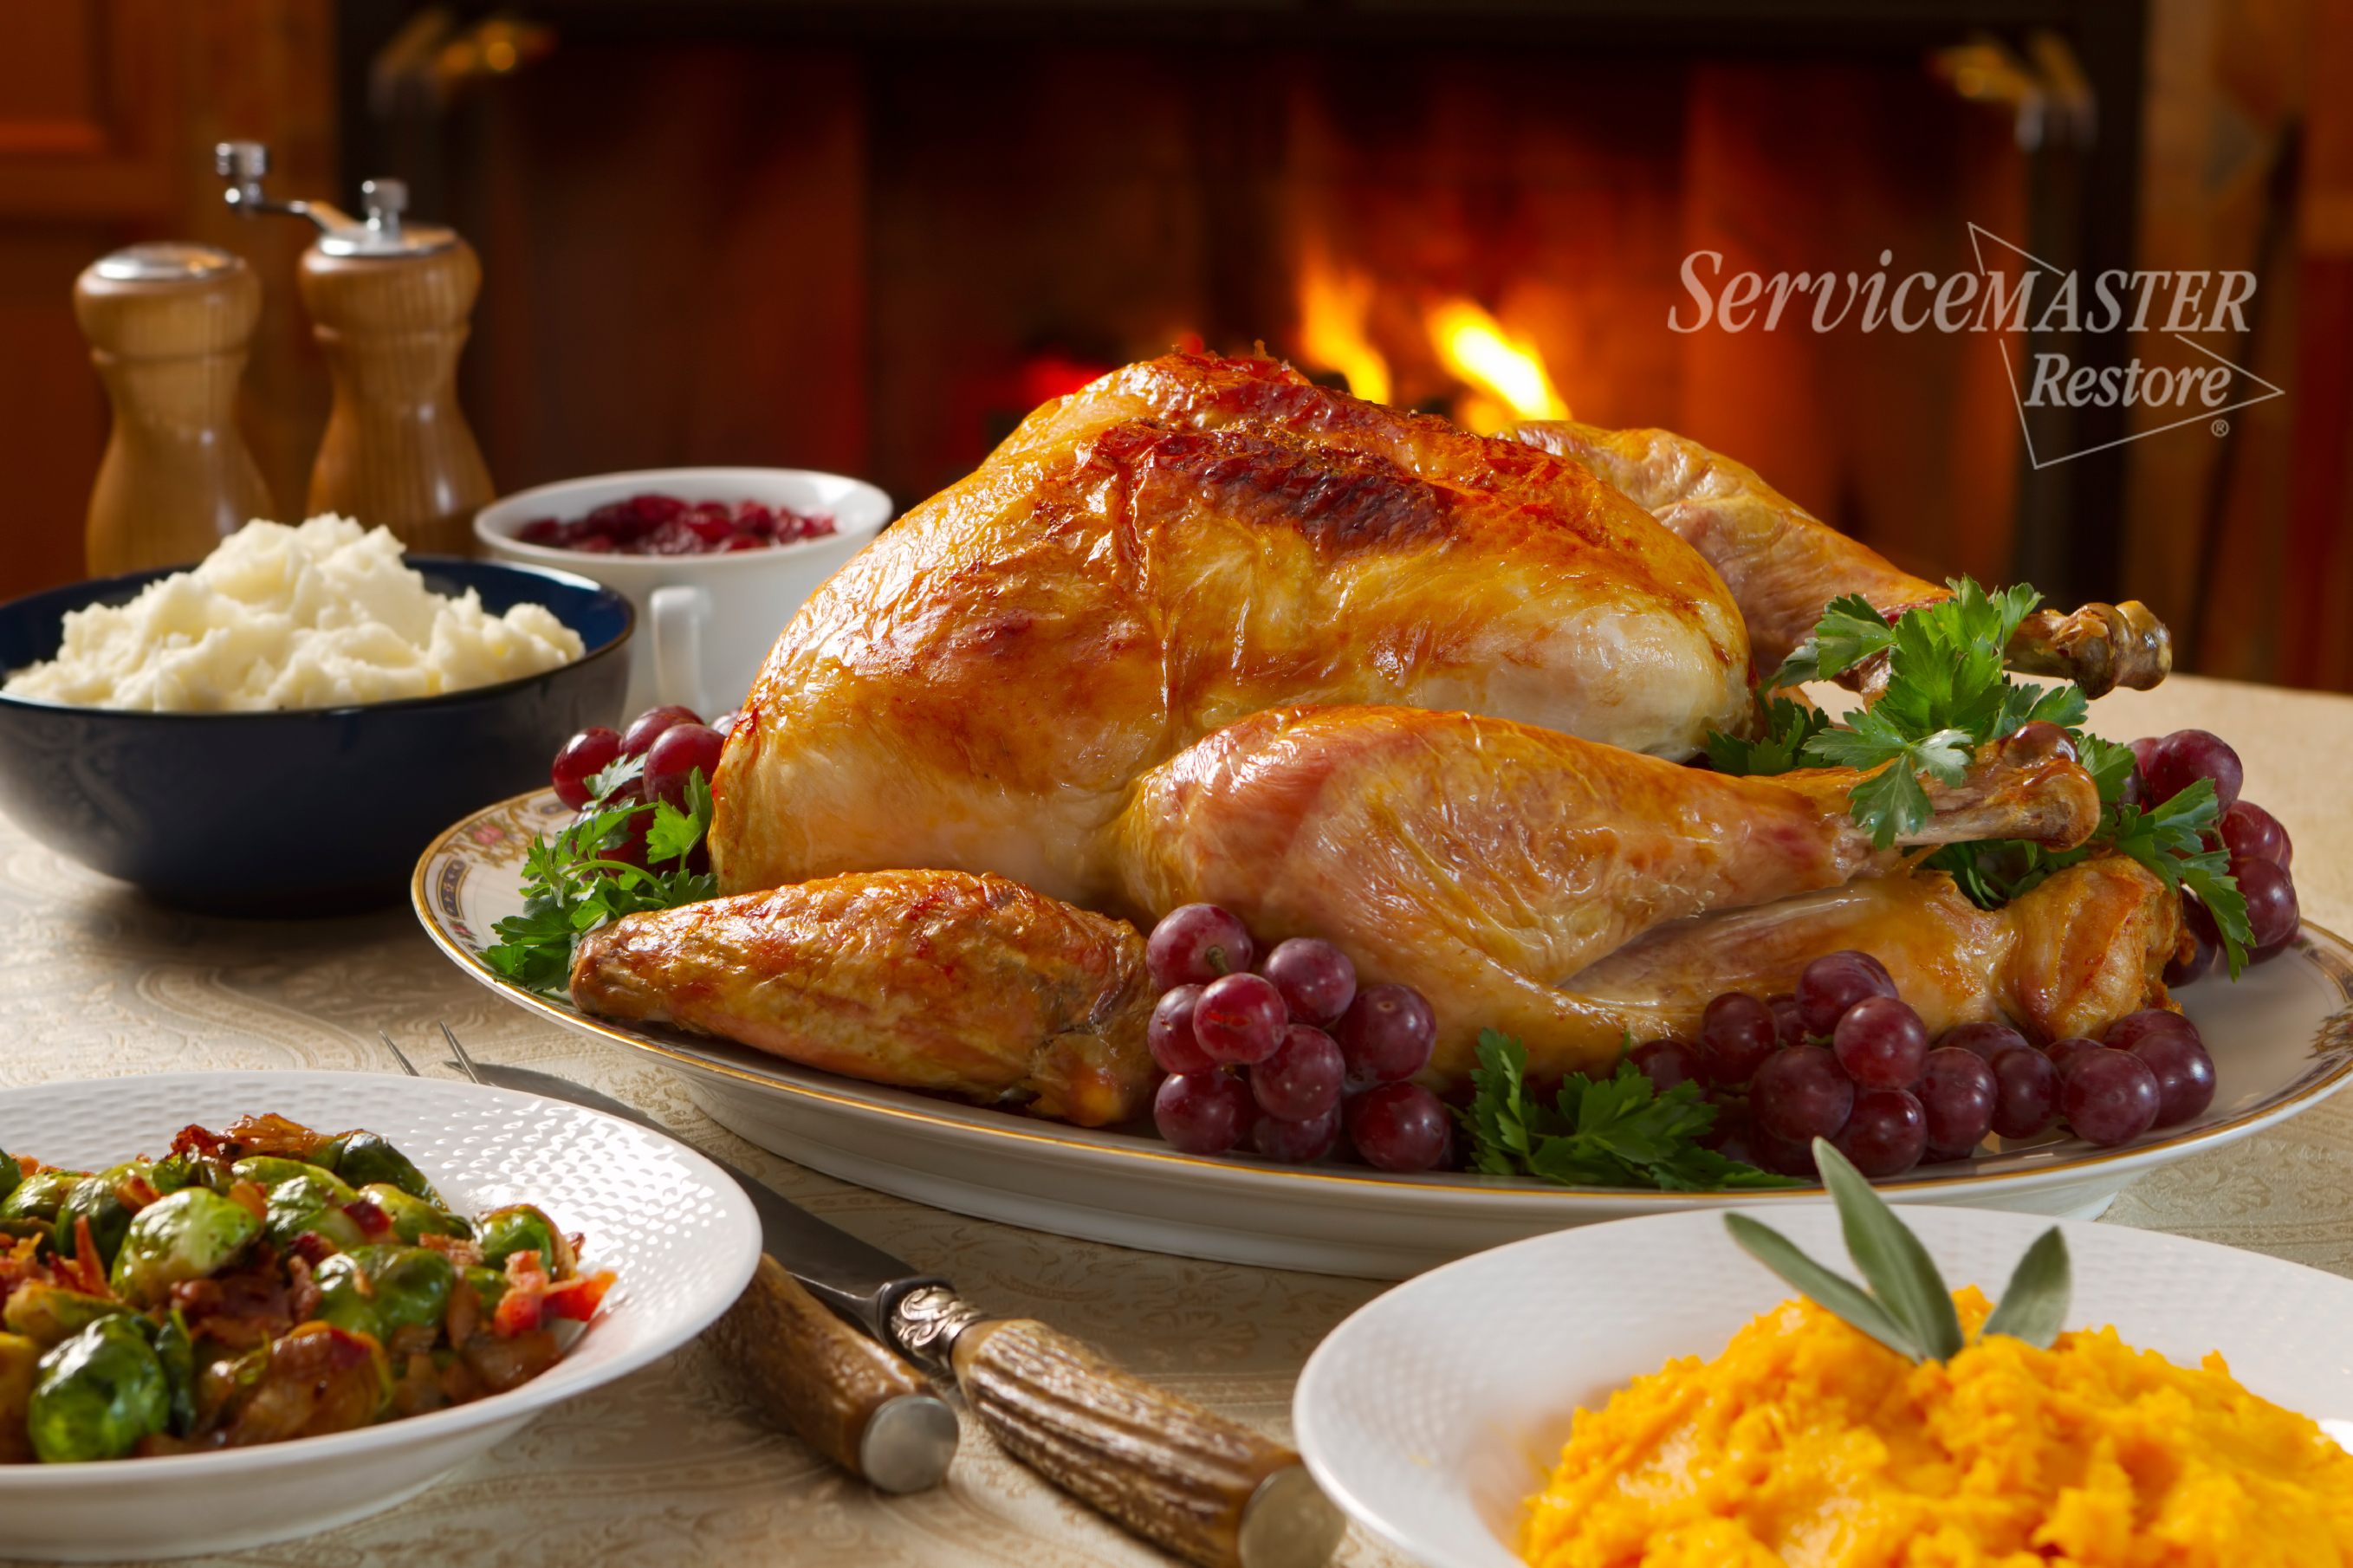 Thanksgiving Food Safety Tips